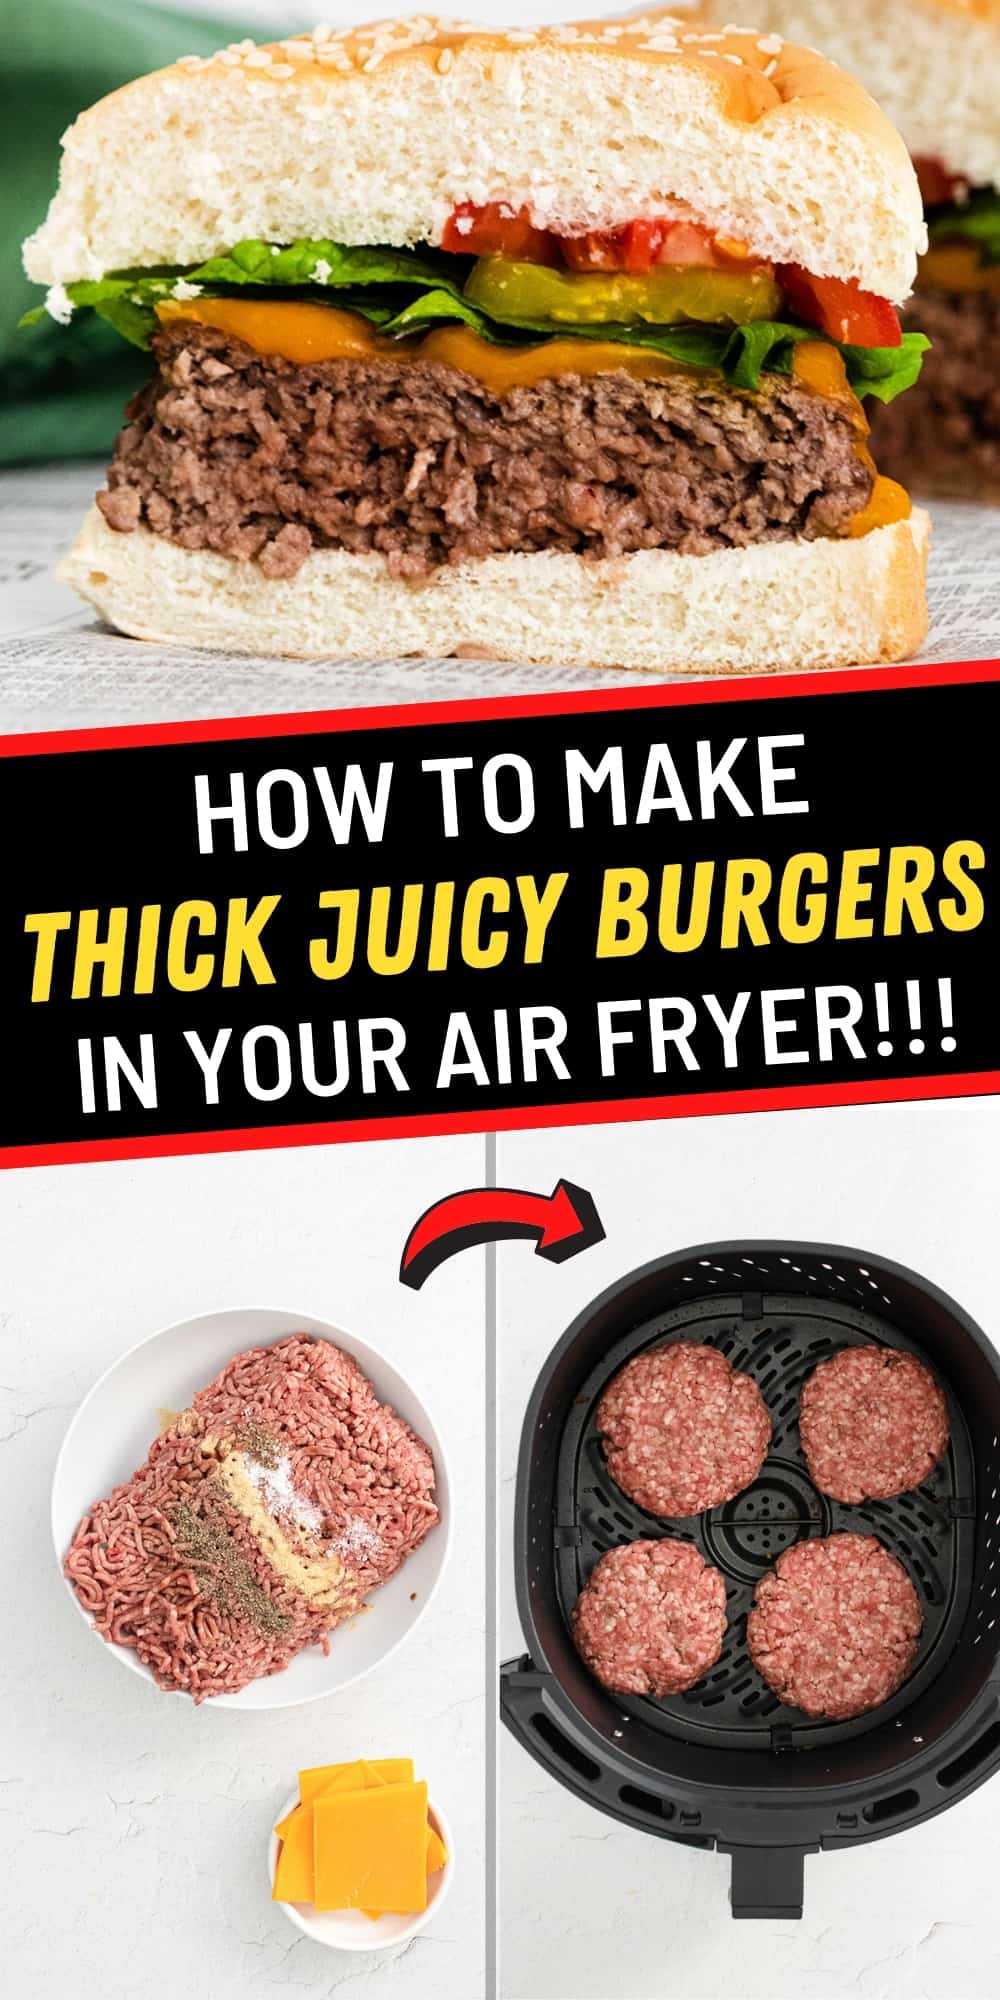 How to Make Thick Juicy Burgers in Your Air Fryer